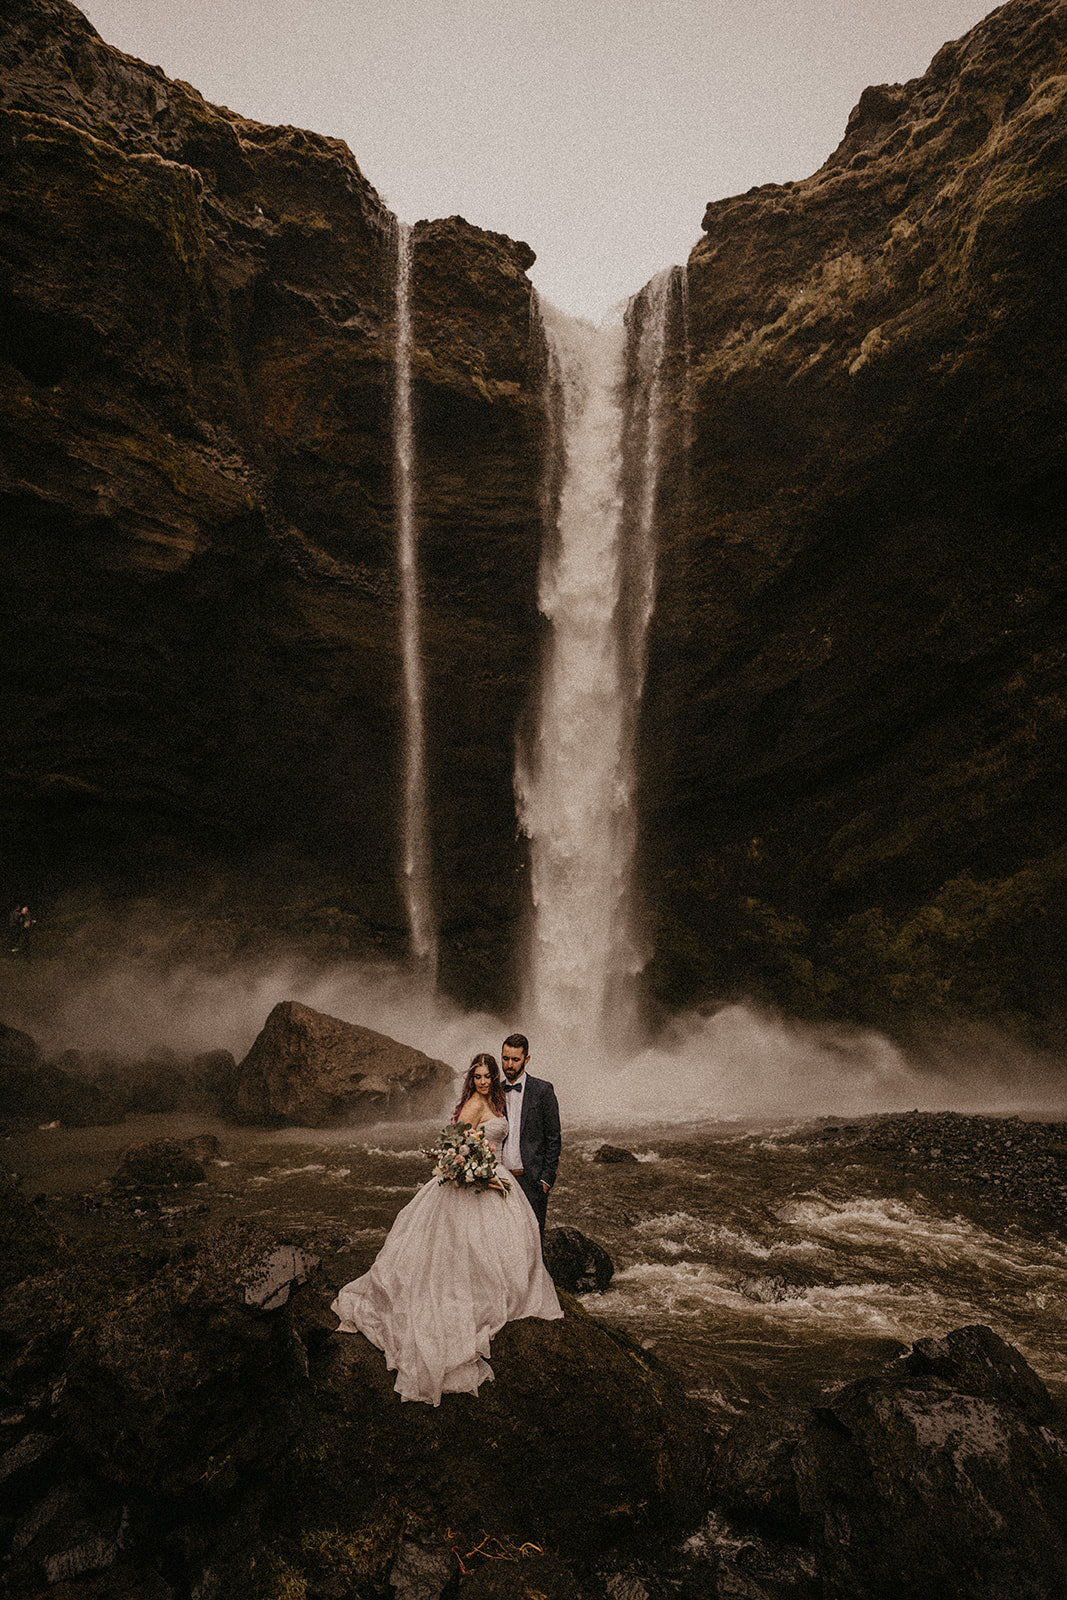 Waterfall elopement in Iceland with romantic vibes and stunning views